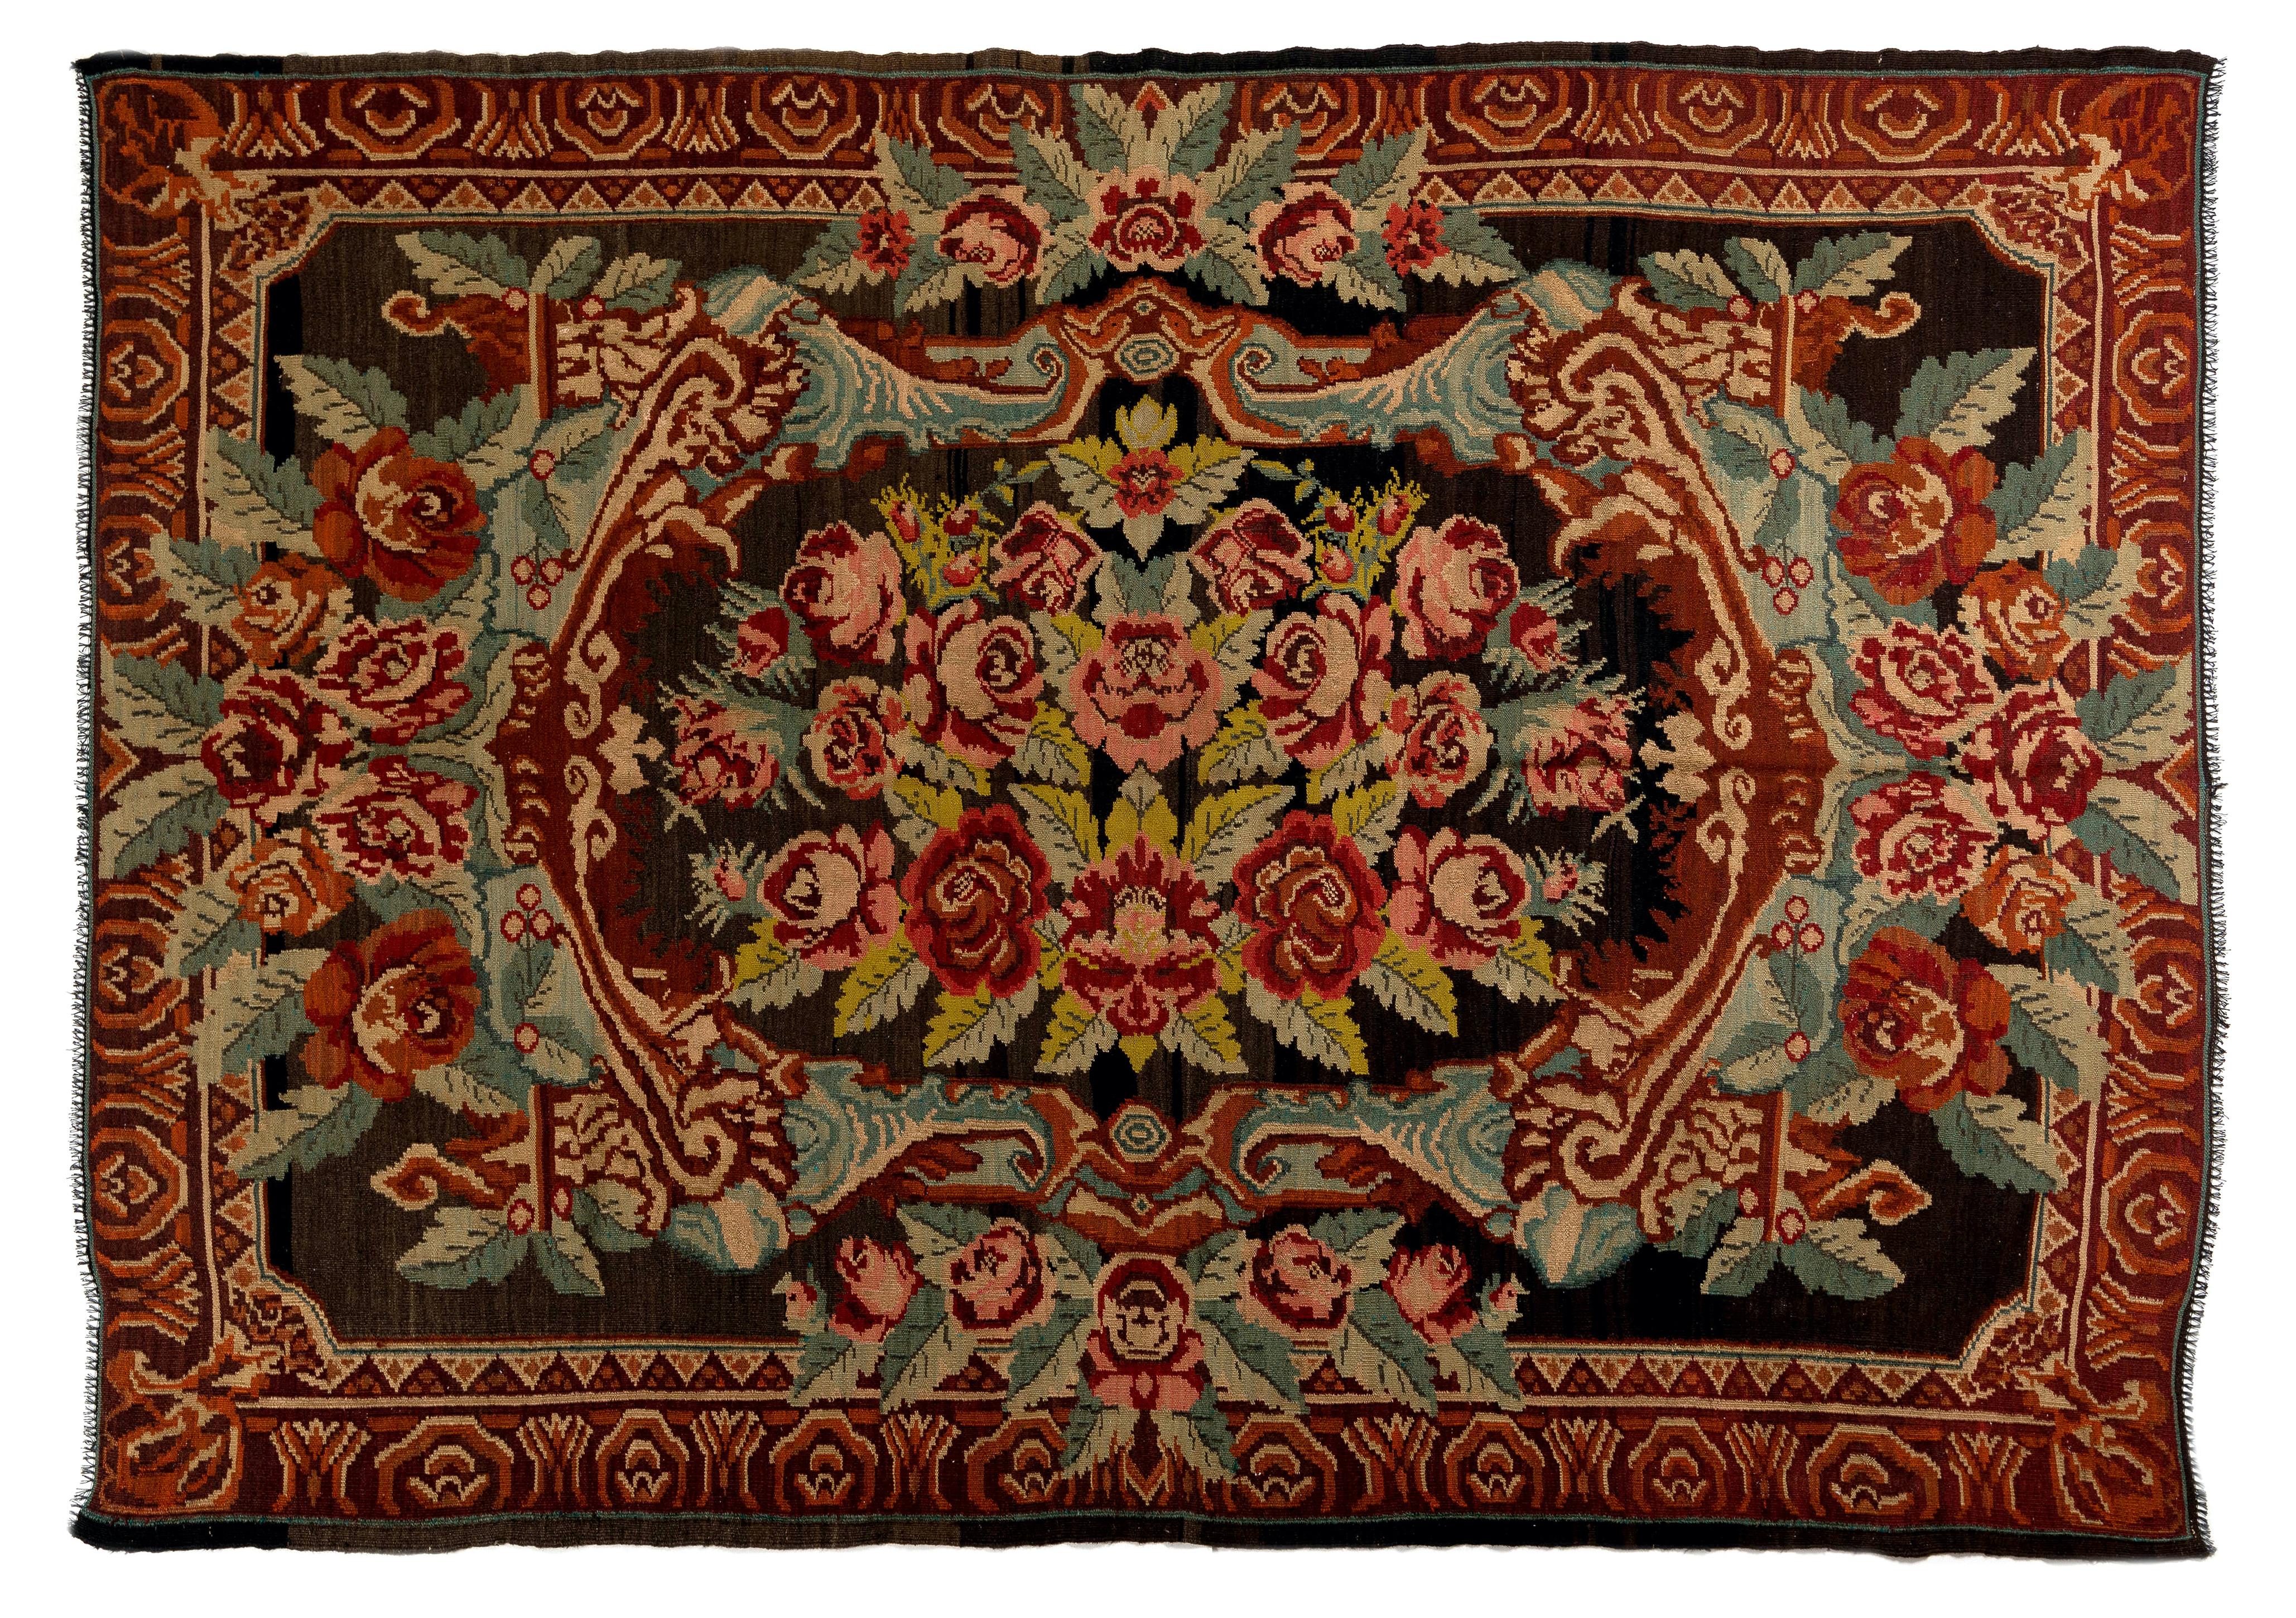 One of a kind vintage Bessarabian Kilim.
A handwoven Eastern European rug from Moldova. These traditional Moldovan flat-weaves are inspired from vintage Aubusson carpets but they are distinguished with their black grounds, large floral patterns in